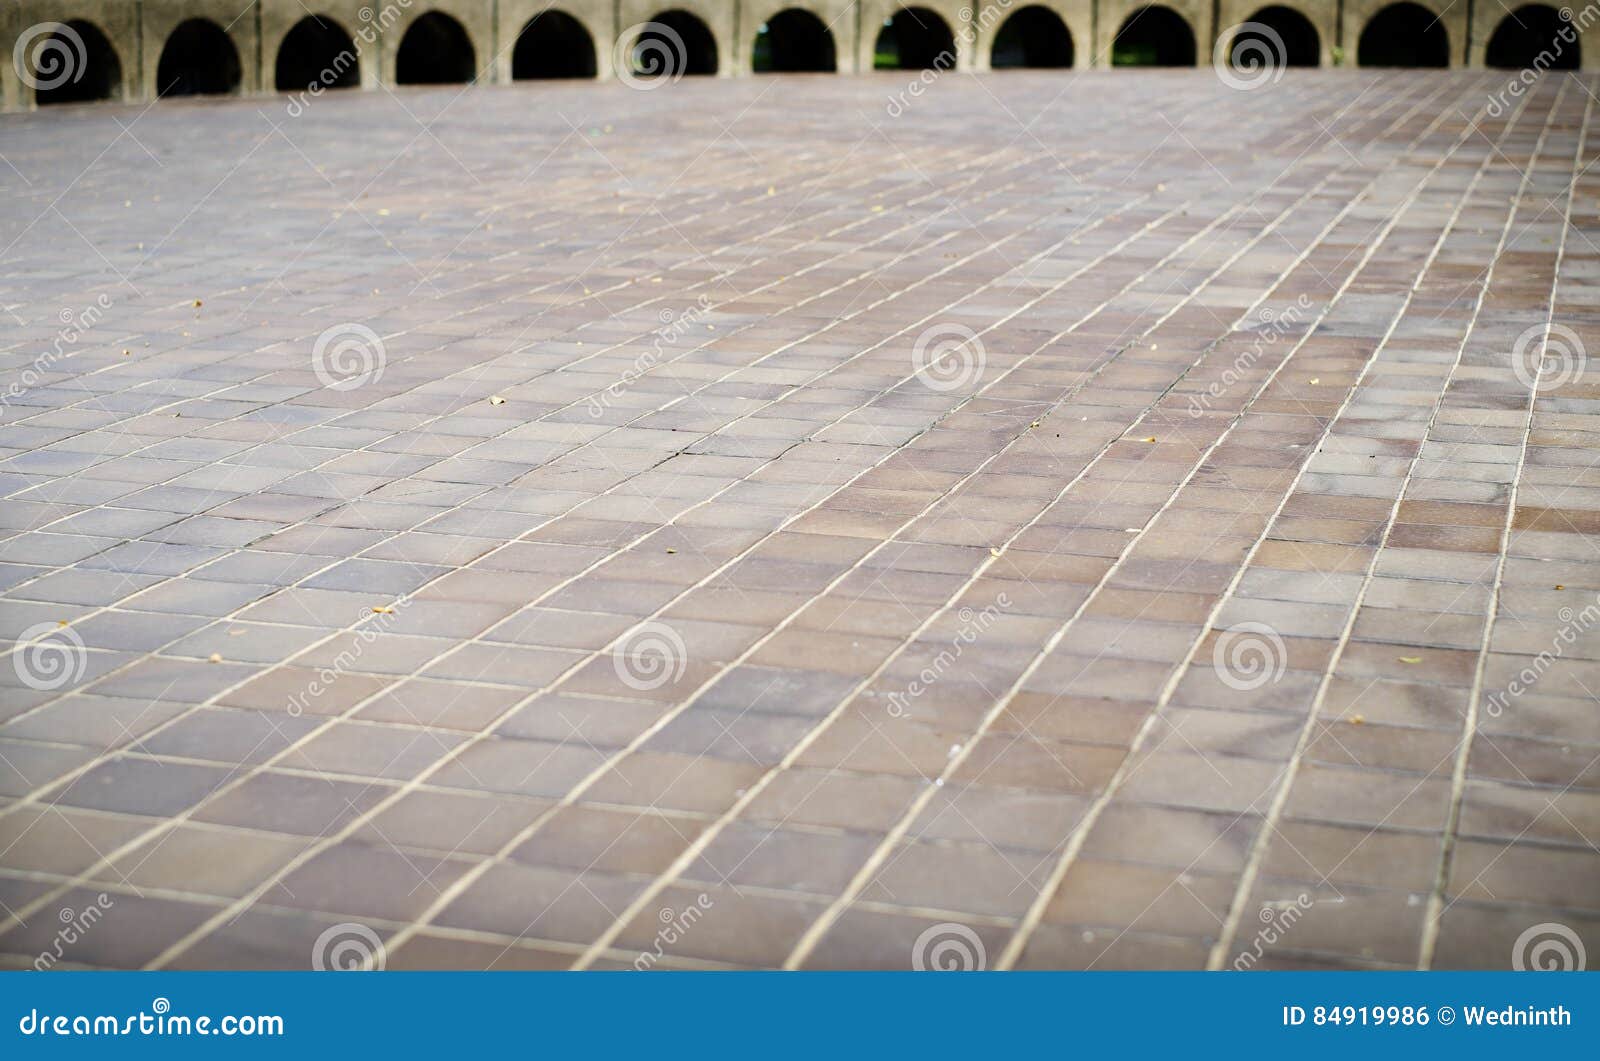 Marble Tiled Floor And Backgroung Photo Outdoor Stock Photo